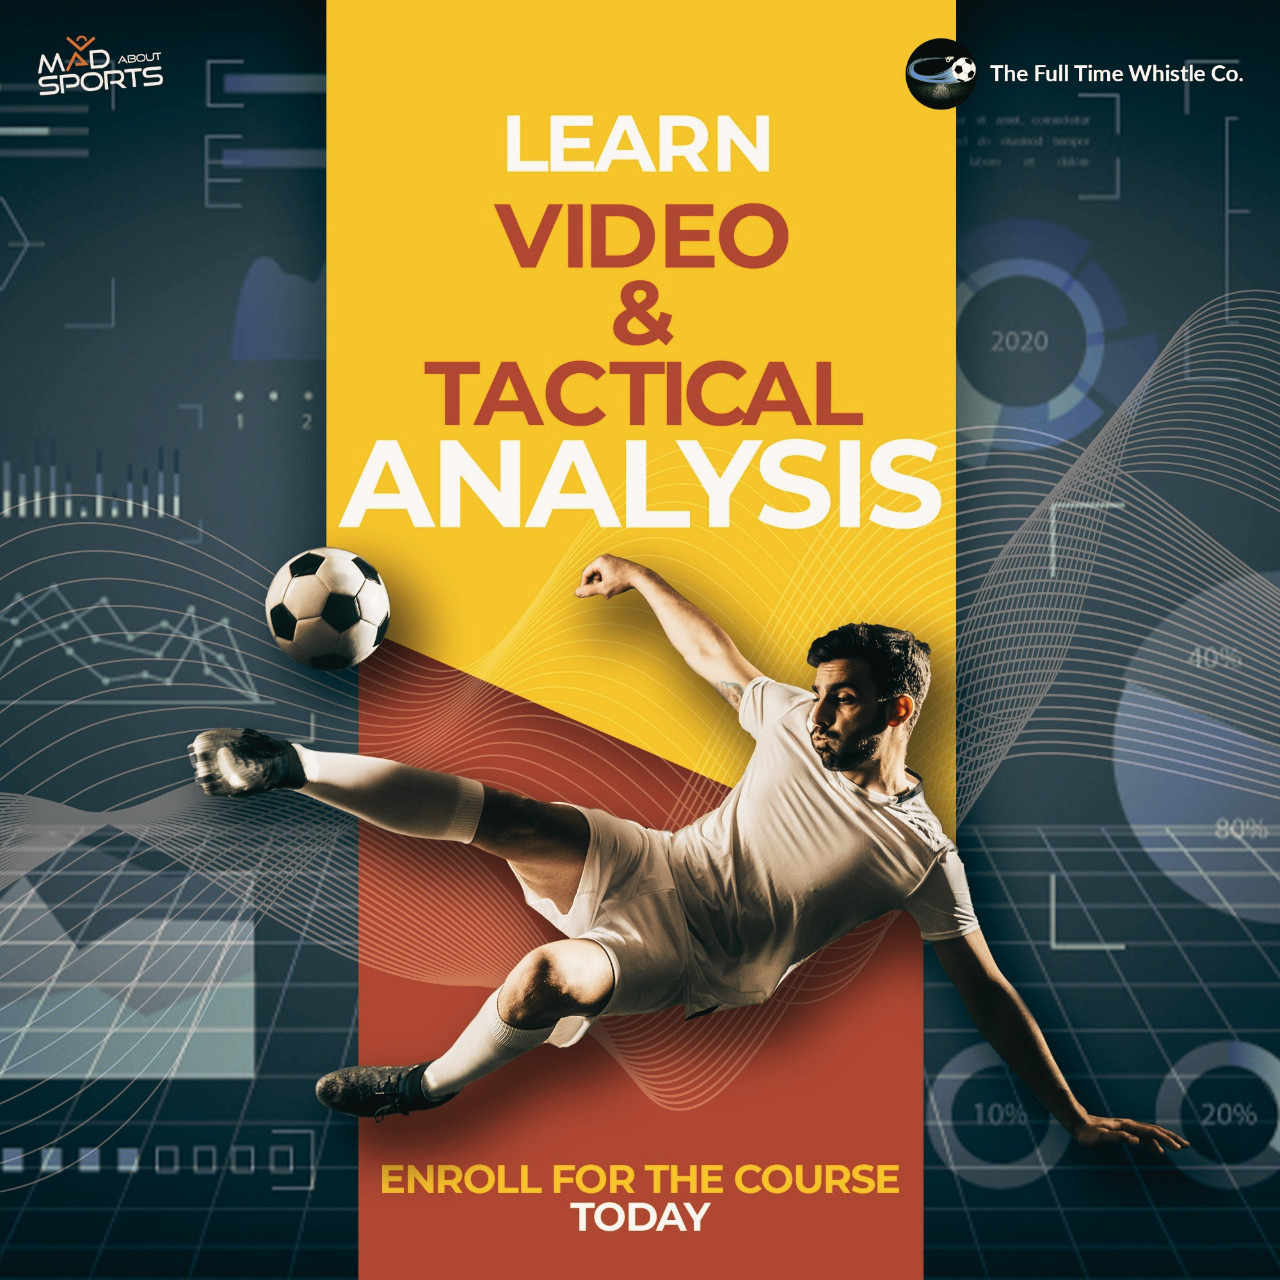 How Do Top Managers Use Video Analysis? – Learn Football Video & Tactical Analysis On Mad About Sports